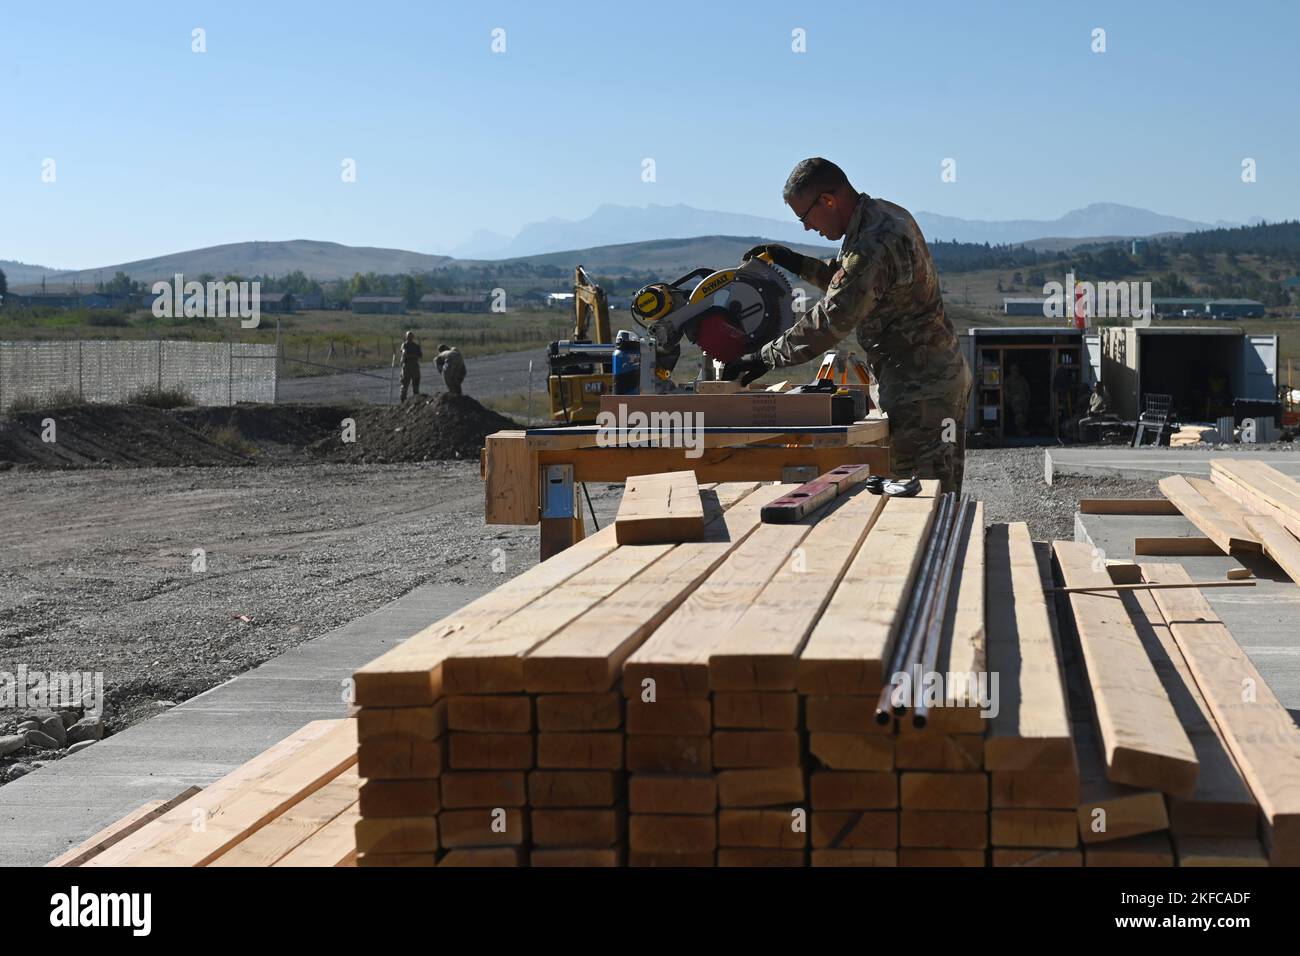 U.S. Air Force Tech. Sgt. Matthew Hamilton, 169th Civil Engineer Squadron engineer from the South Carolina Air National Guard, uses a miter saw during construction of a community center for the Blackfeet Nation Native Americans at Heart Butte, Montana, September 6, 2022. This temporary deployment is part of the 169th Civil Engineer Squadron’s yearly Innovative Readiness Training (IRT) that helps Airmen train in a real-world environment to acquire and maintain their trade skills. Stock Photo